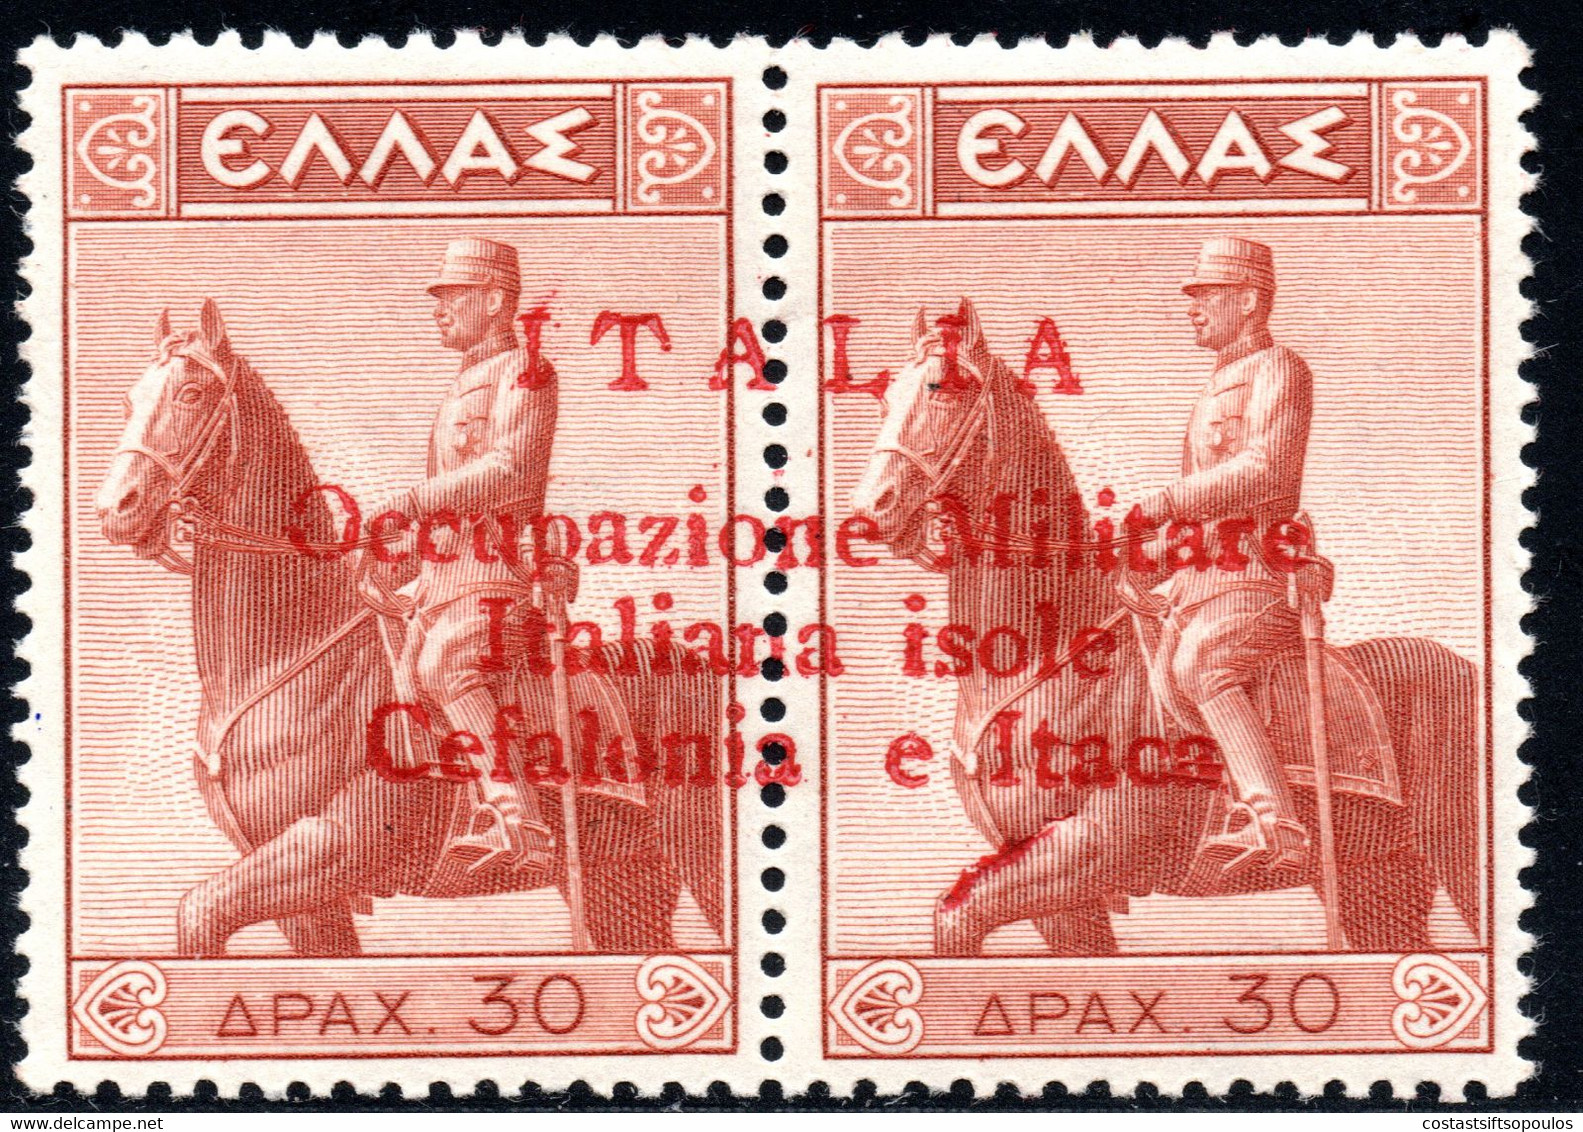 165.GREECE,ITALY,IONIAN,CEFALONIA,1941 30DR.RIDER,RED OVERPRINT???,MNH,POSSIBLY PRIVATE - Isole Ioniche